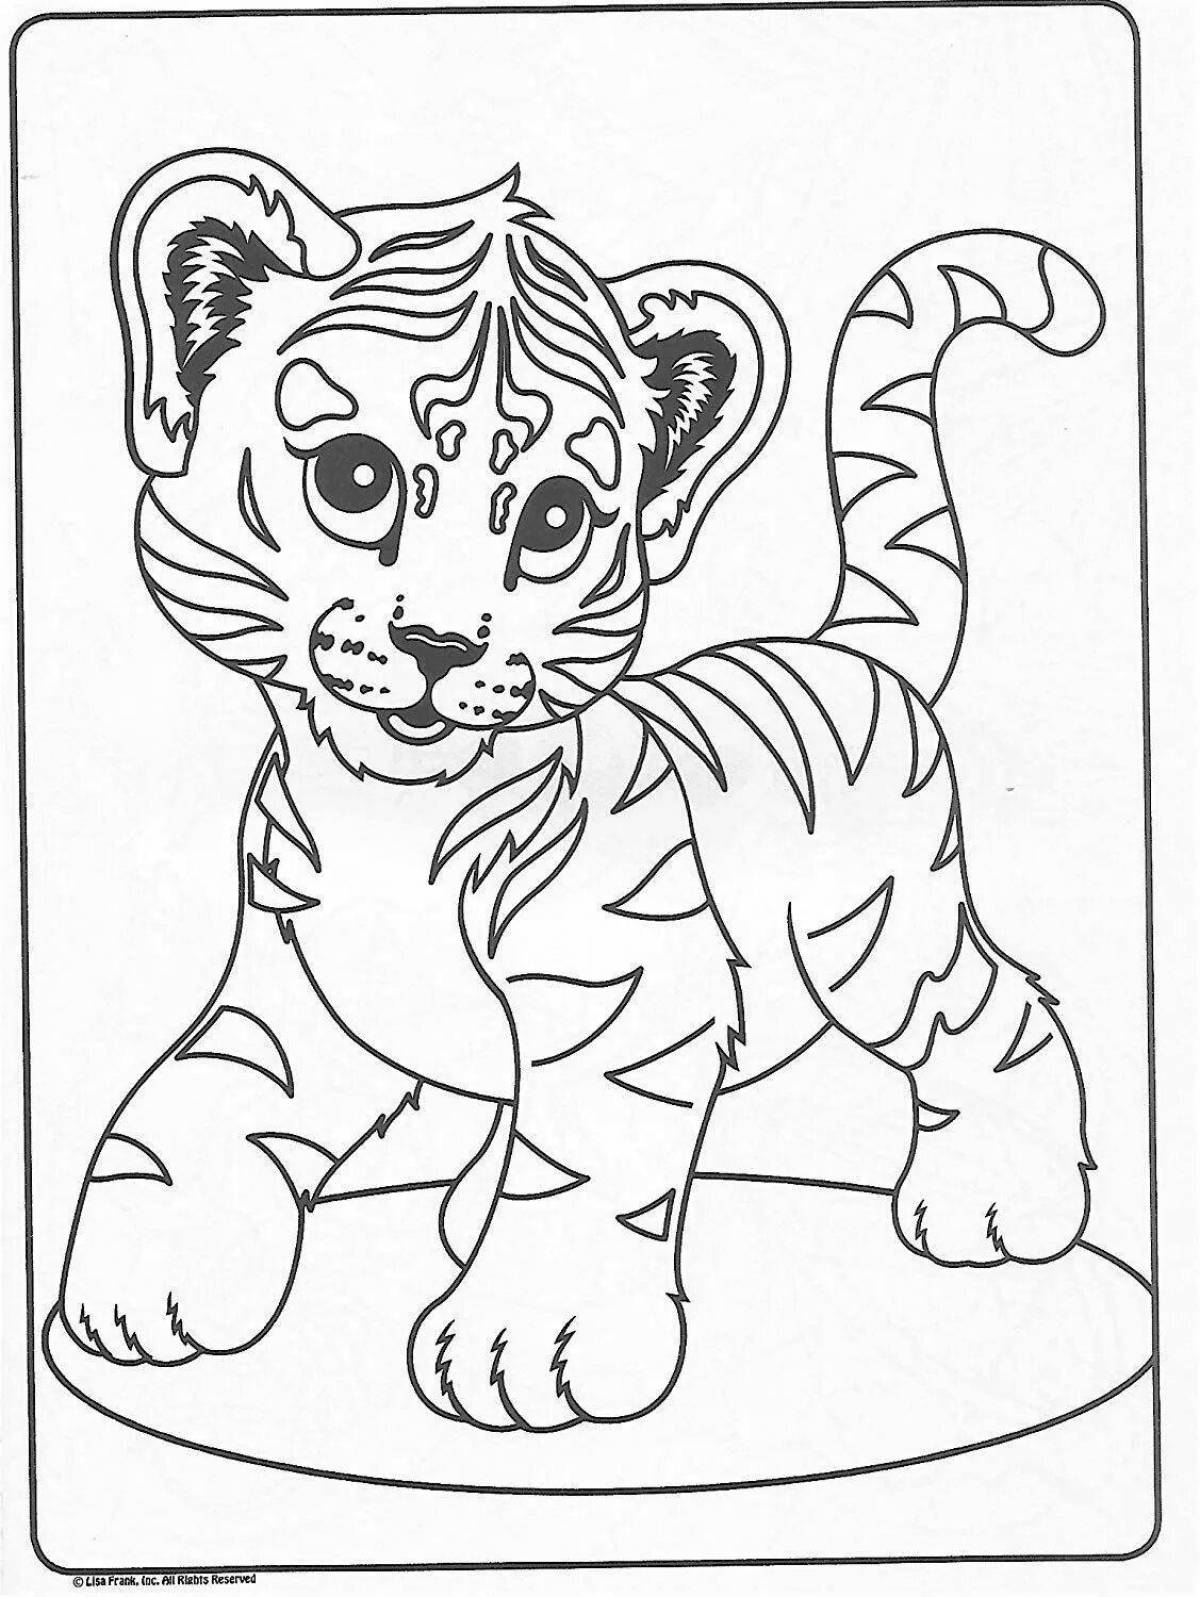 Delightful tiger coloring book for children 6-7 years old